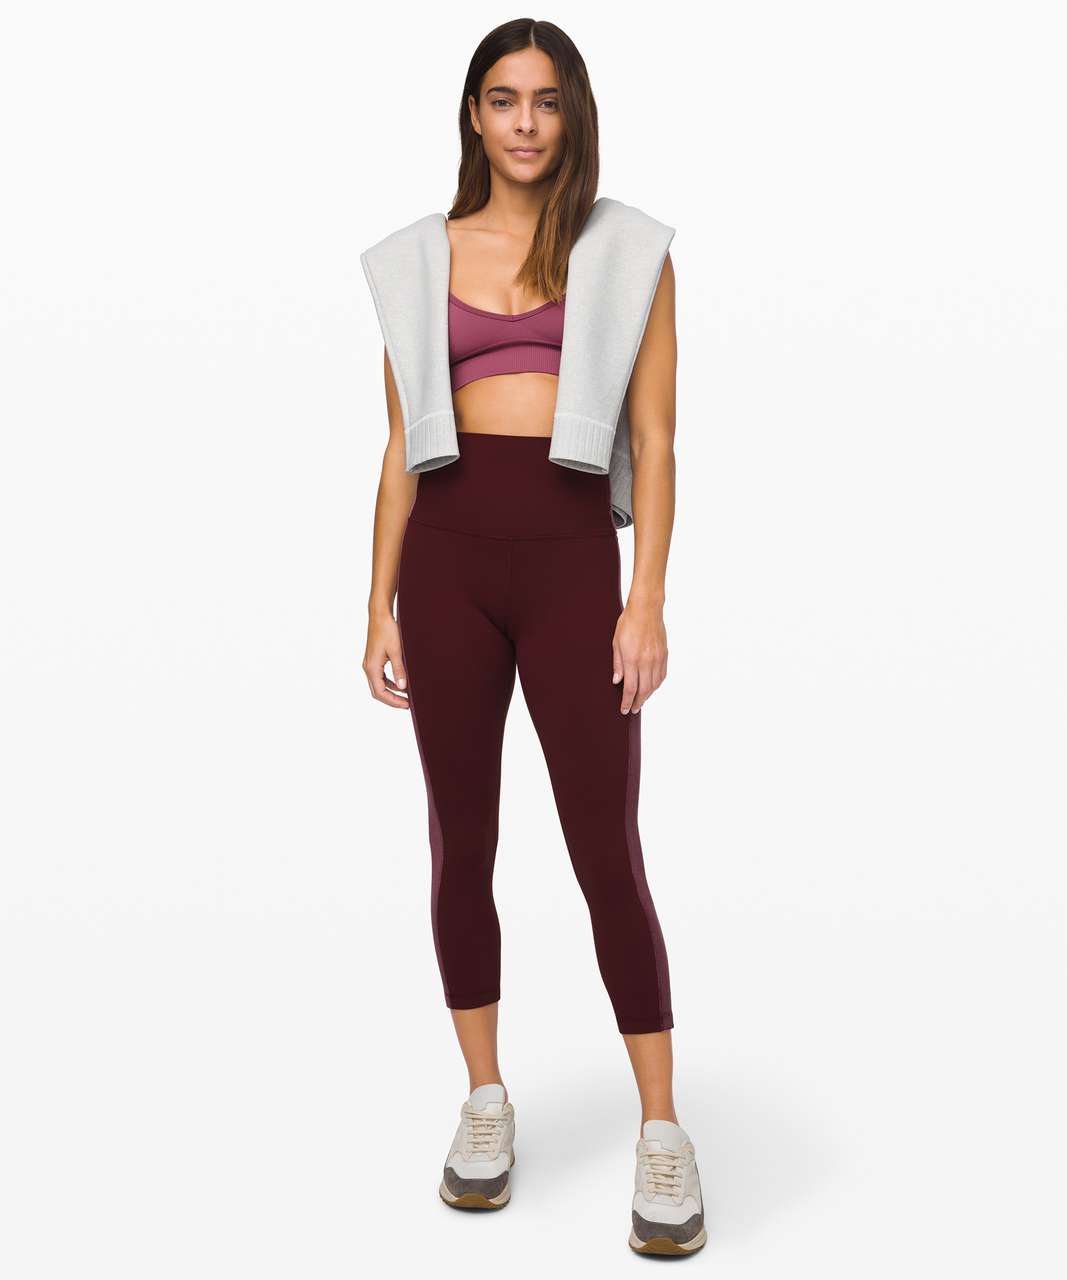 Lululemon Align Super High-Rise Crop 21 - Wee Are From Space